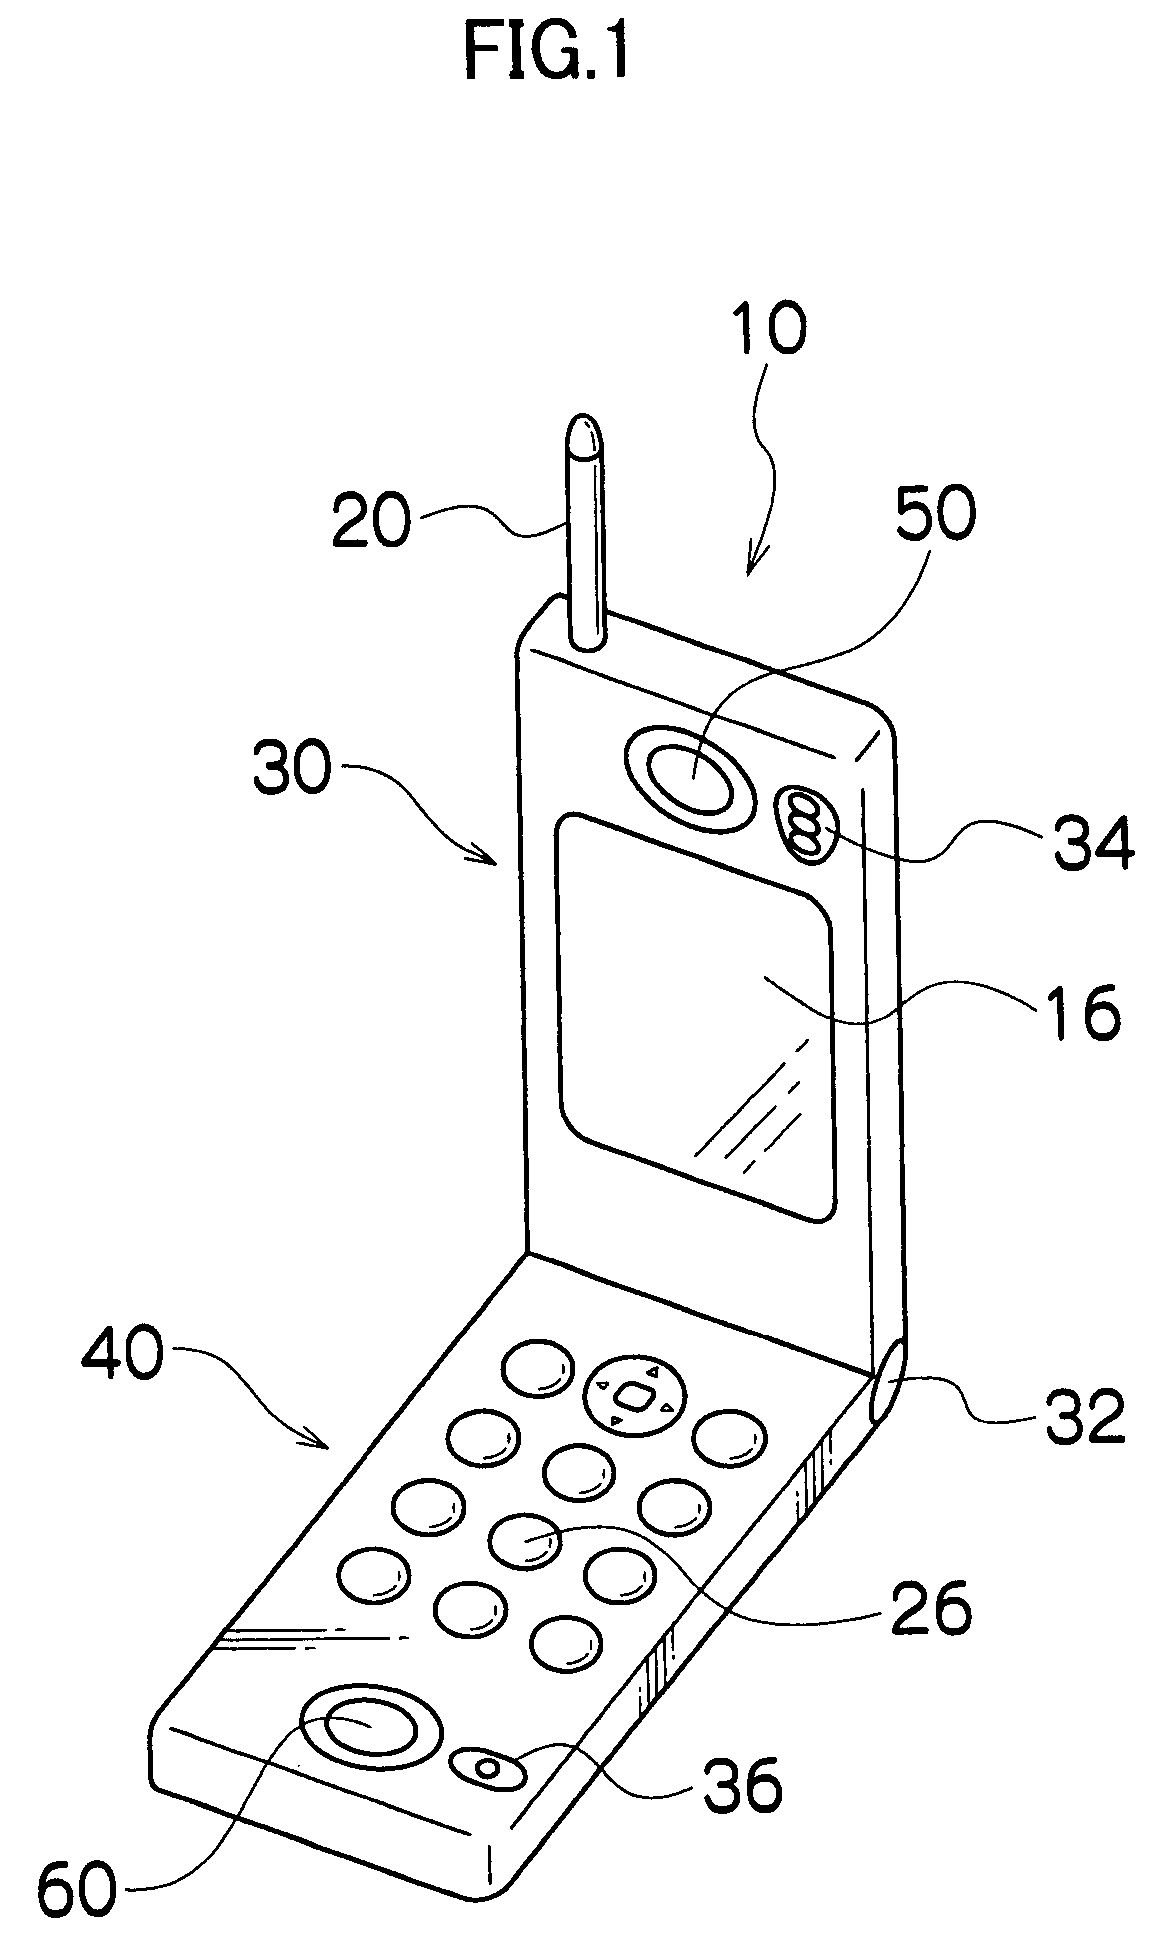 Mobile camera phone with adjustable focal length